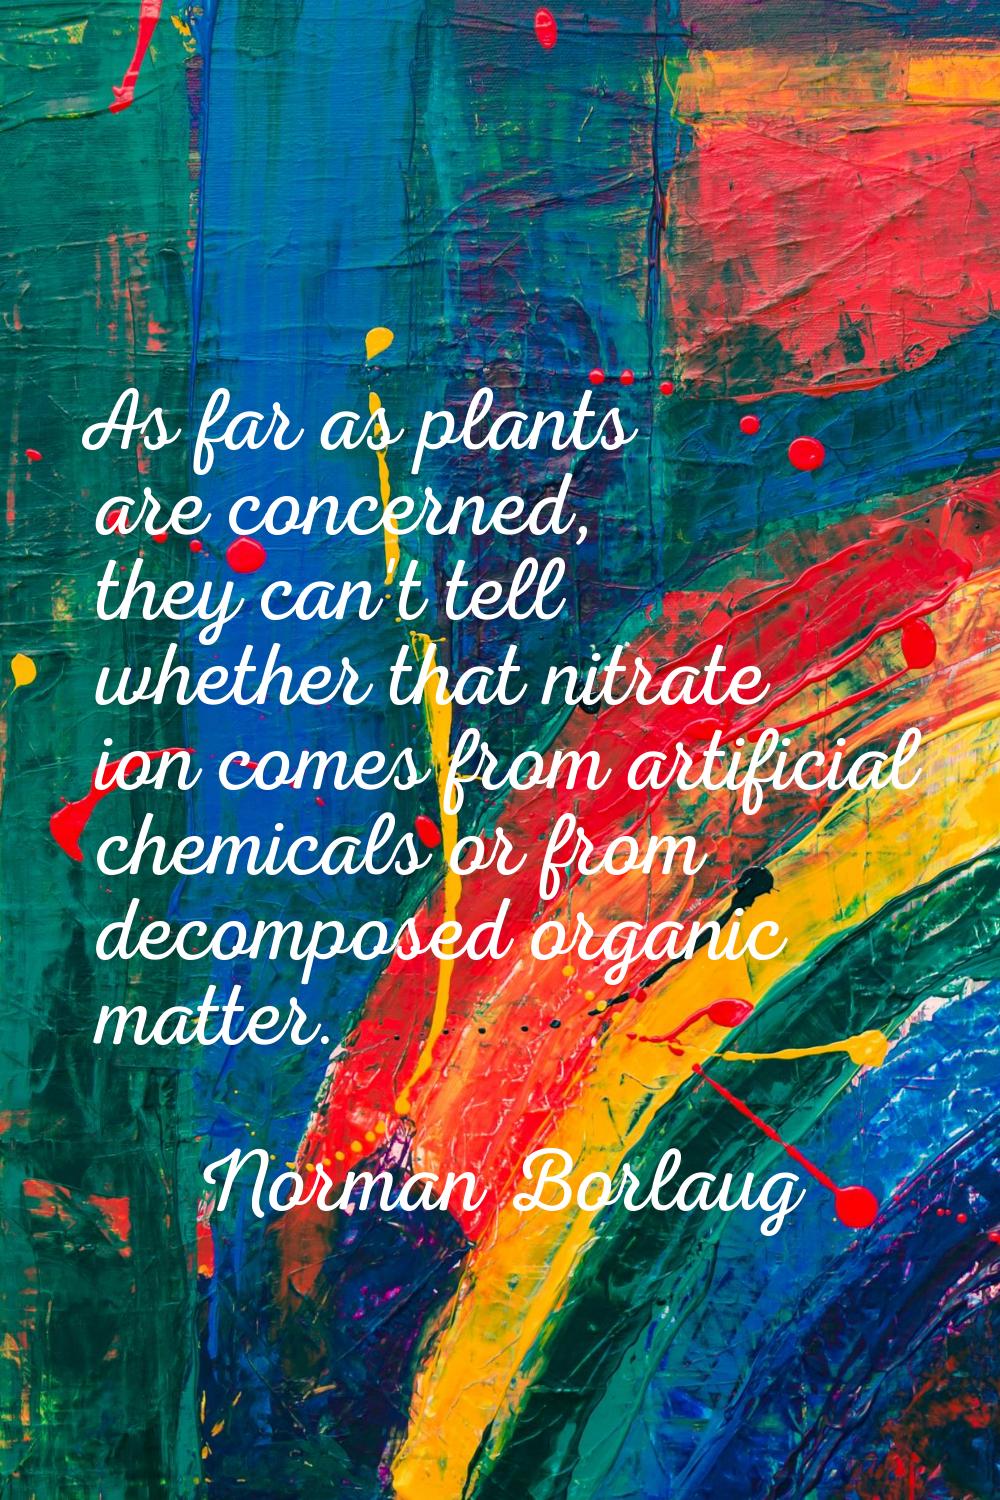 As far as plants are concerned, they can't tell whether that nitrate ion comes from artificial chem